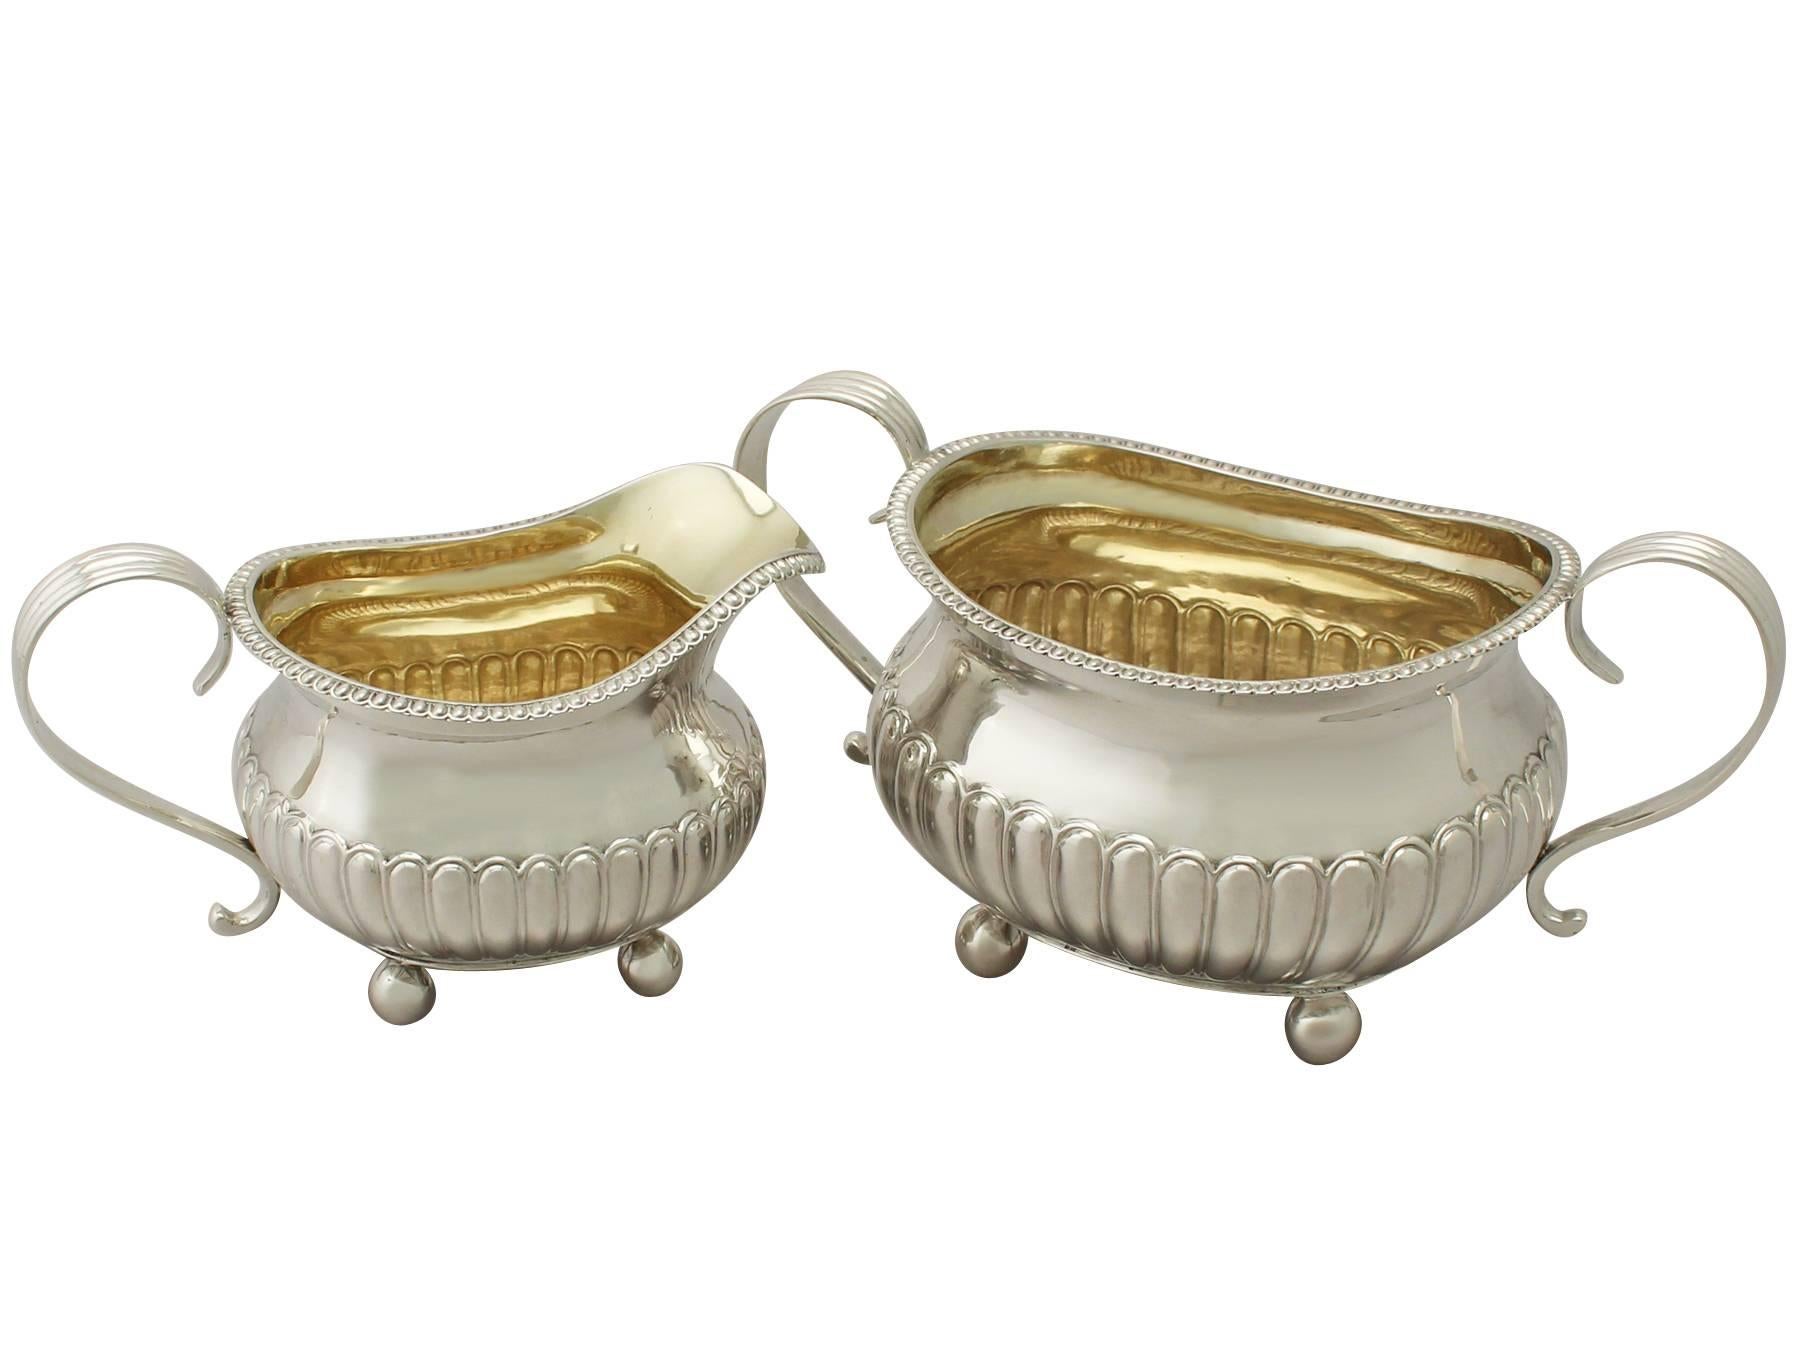 An exceptional, fine and impressive antique George III English sterling silver cream jug and sugar bowl set; an addition to our Georgian silver teaware collection.

This exceptional antique George III English sterling creamer and sugar bowl have a